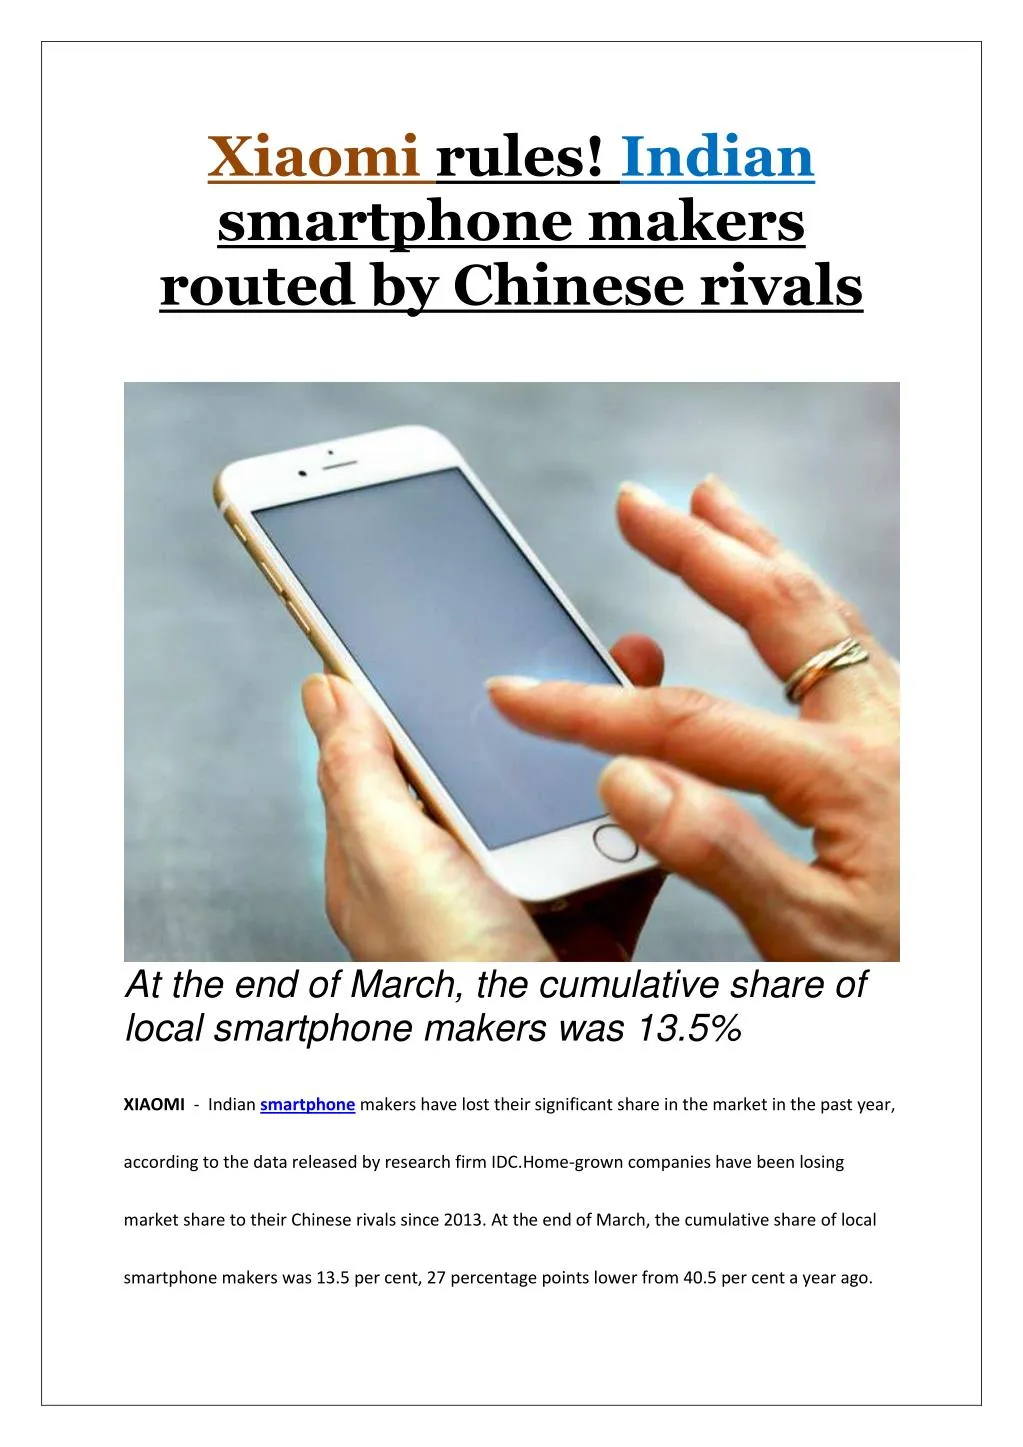 xiaomi smartphone makers routed by chinese rivals